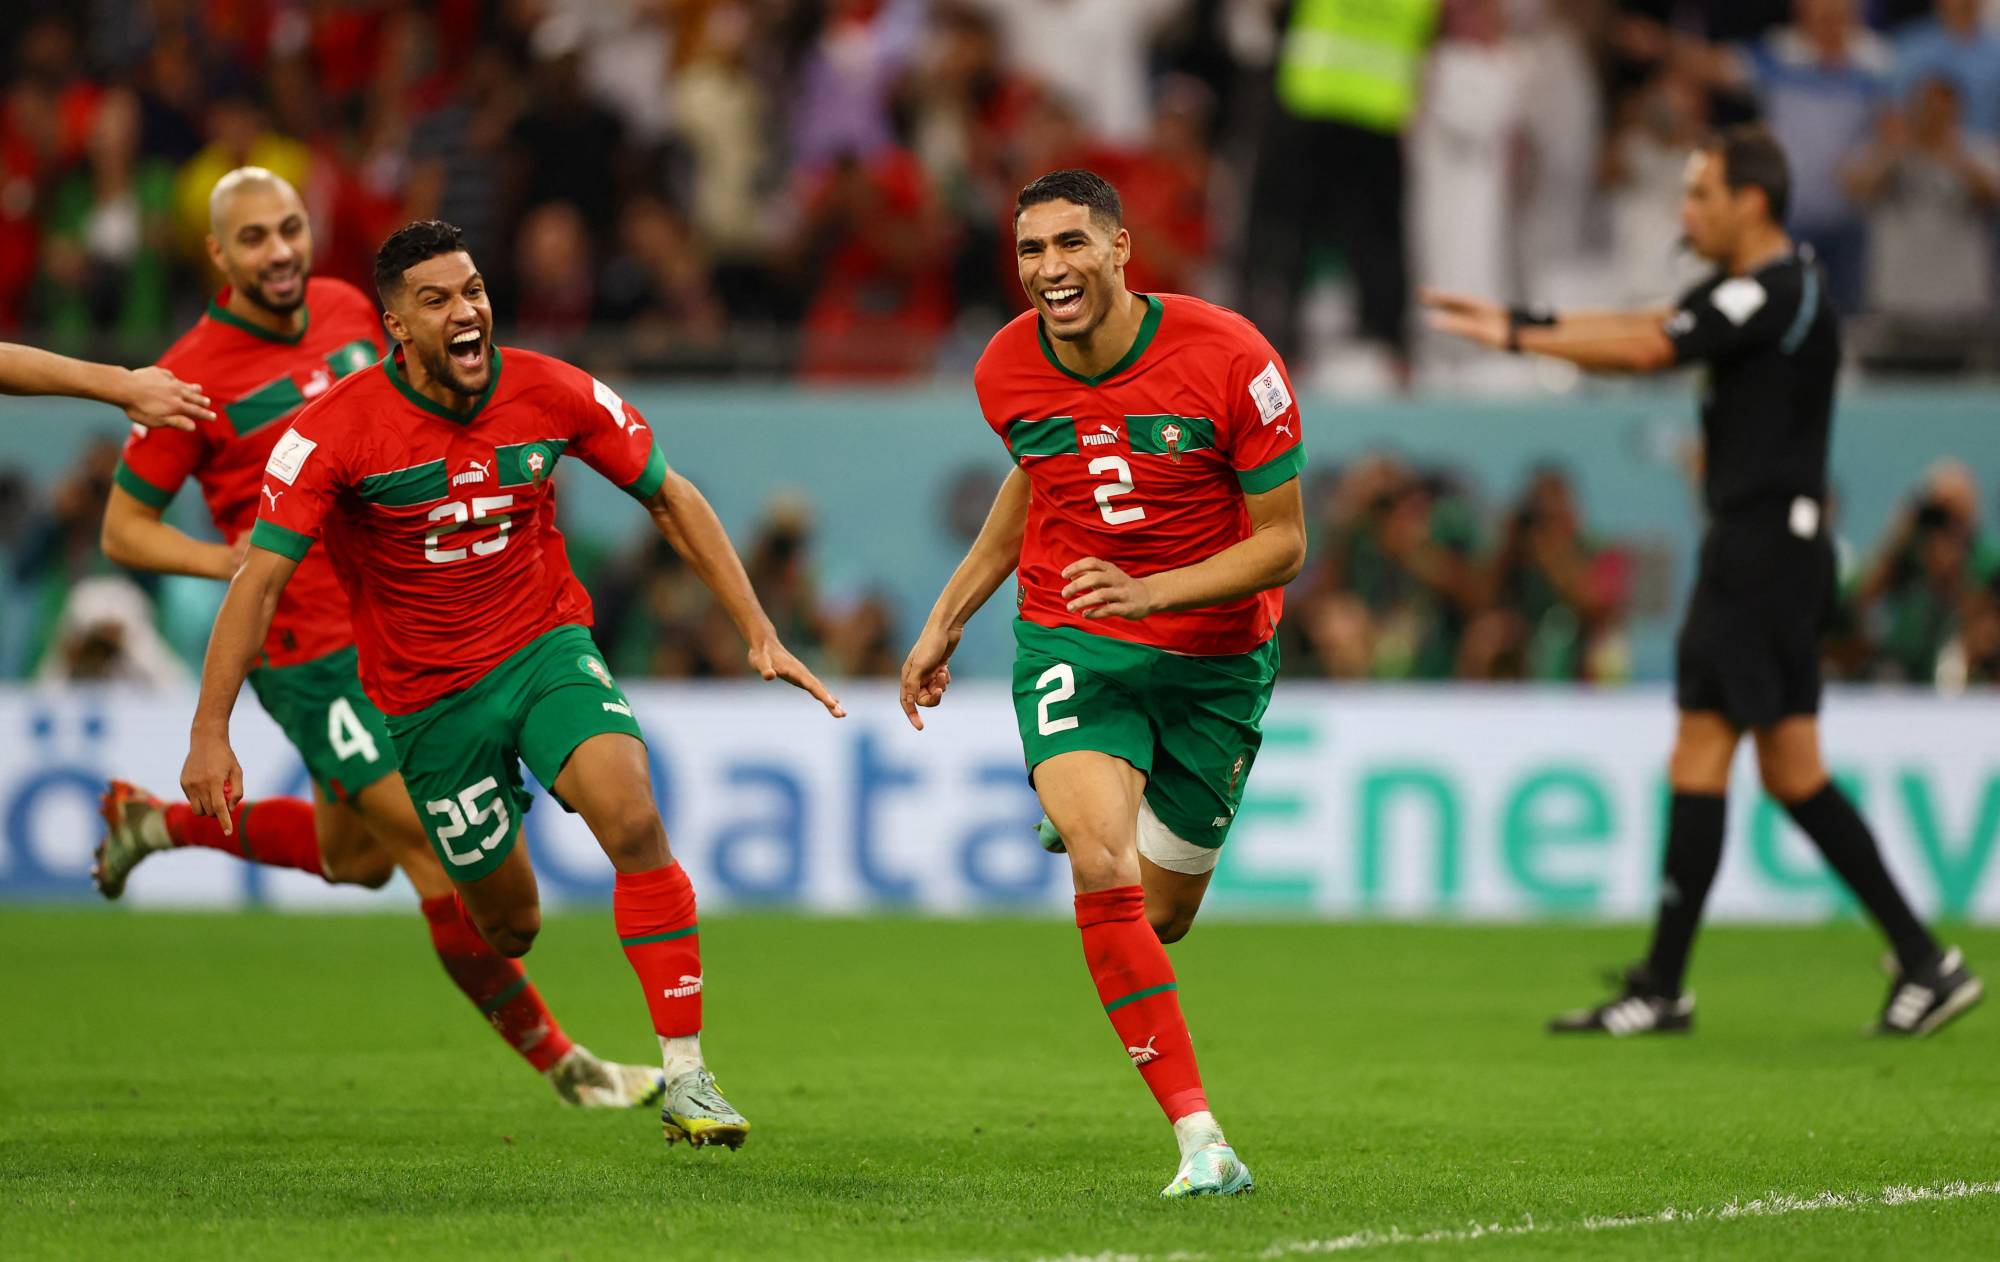 Moroccans celebrate historic World Cup win over Spain